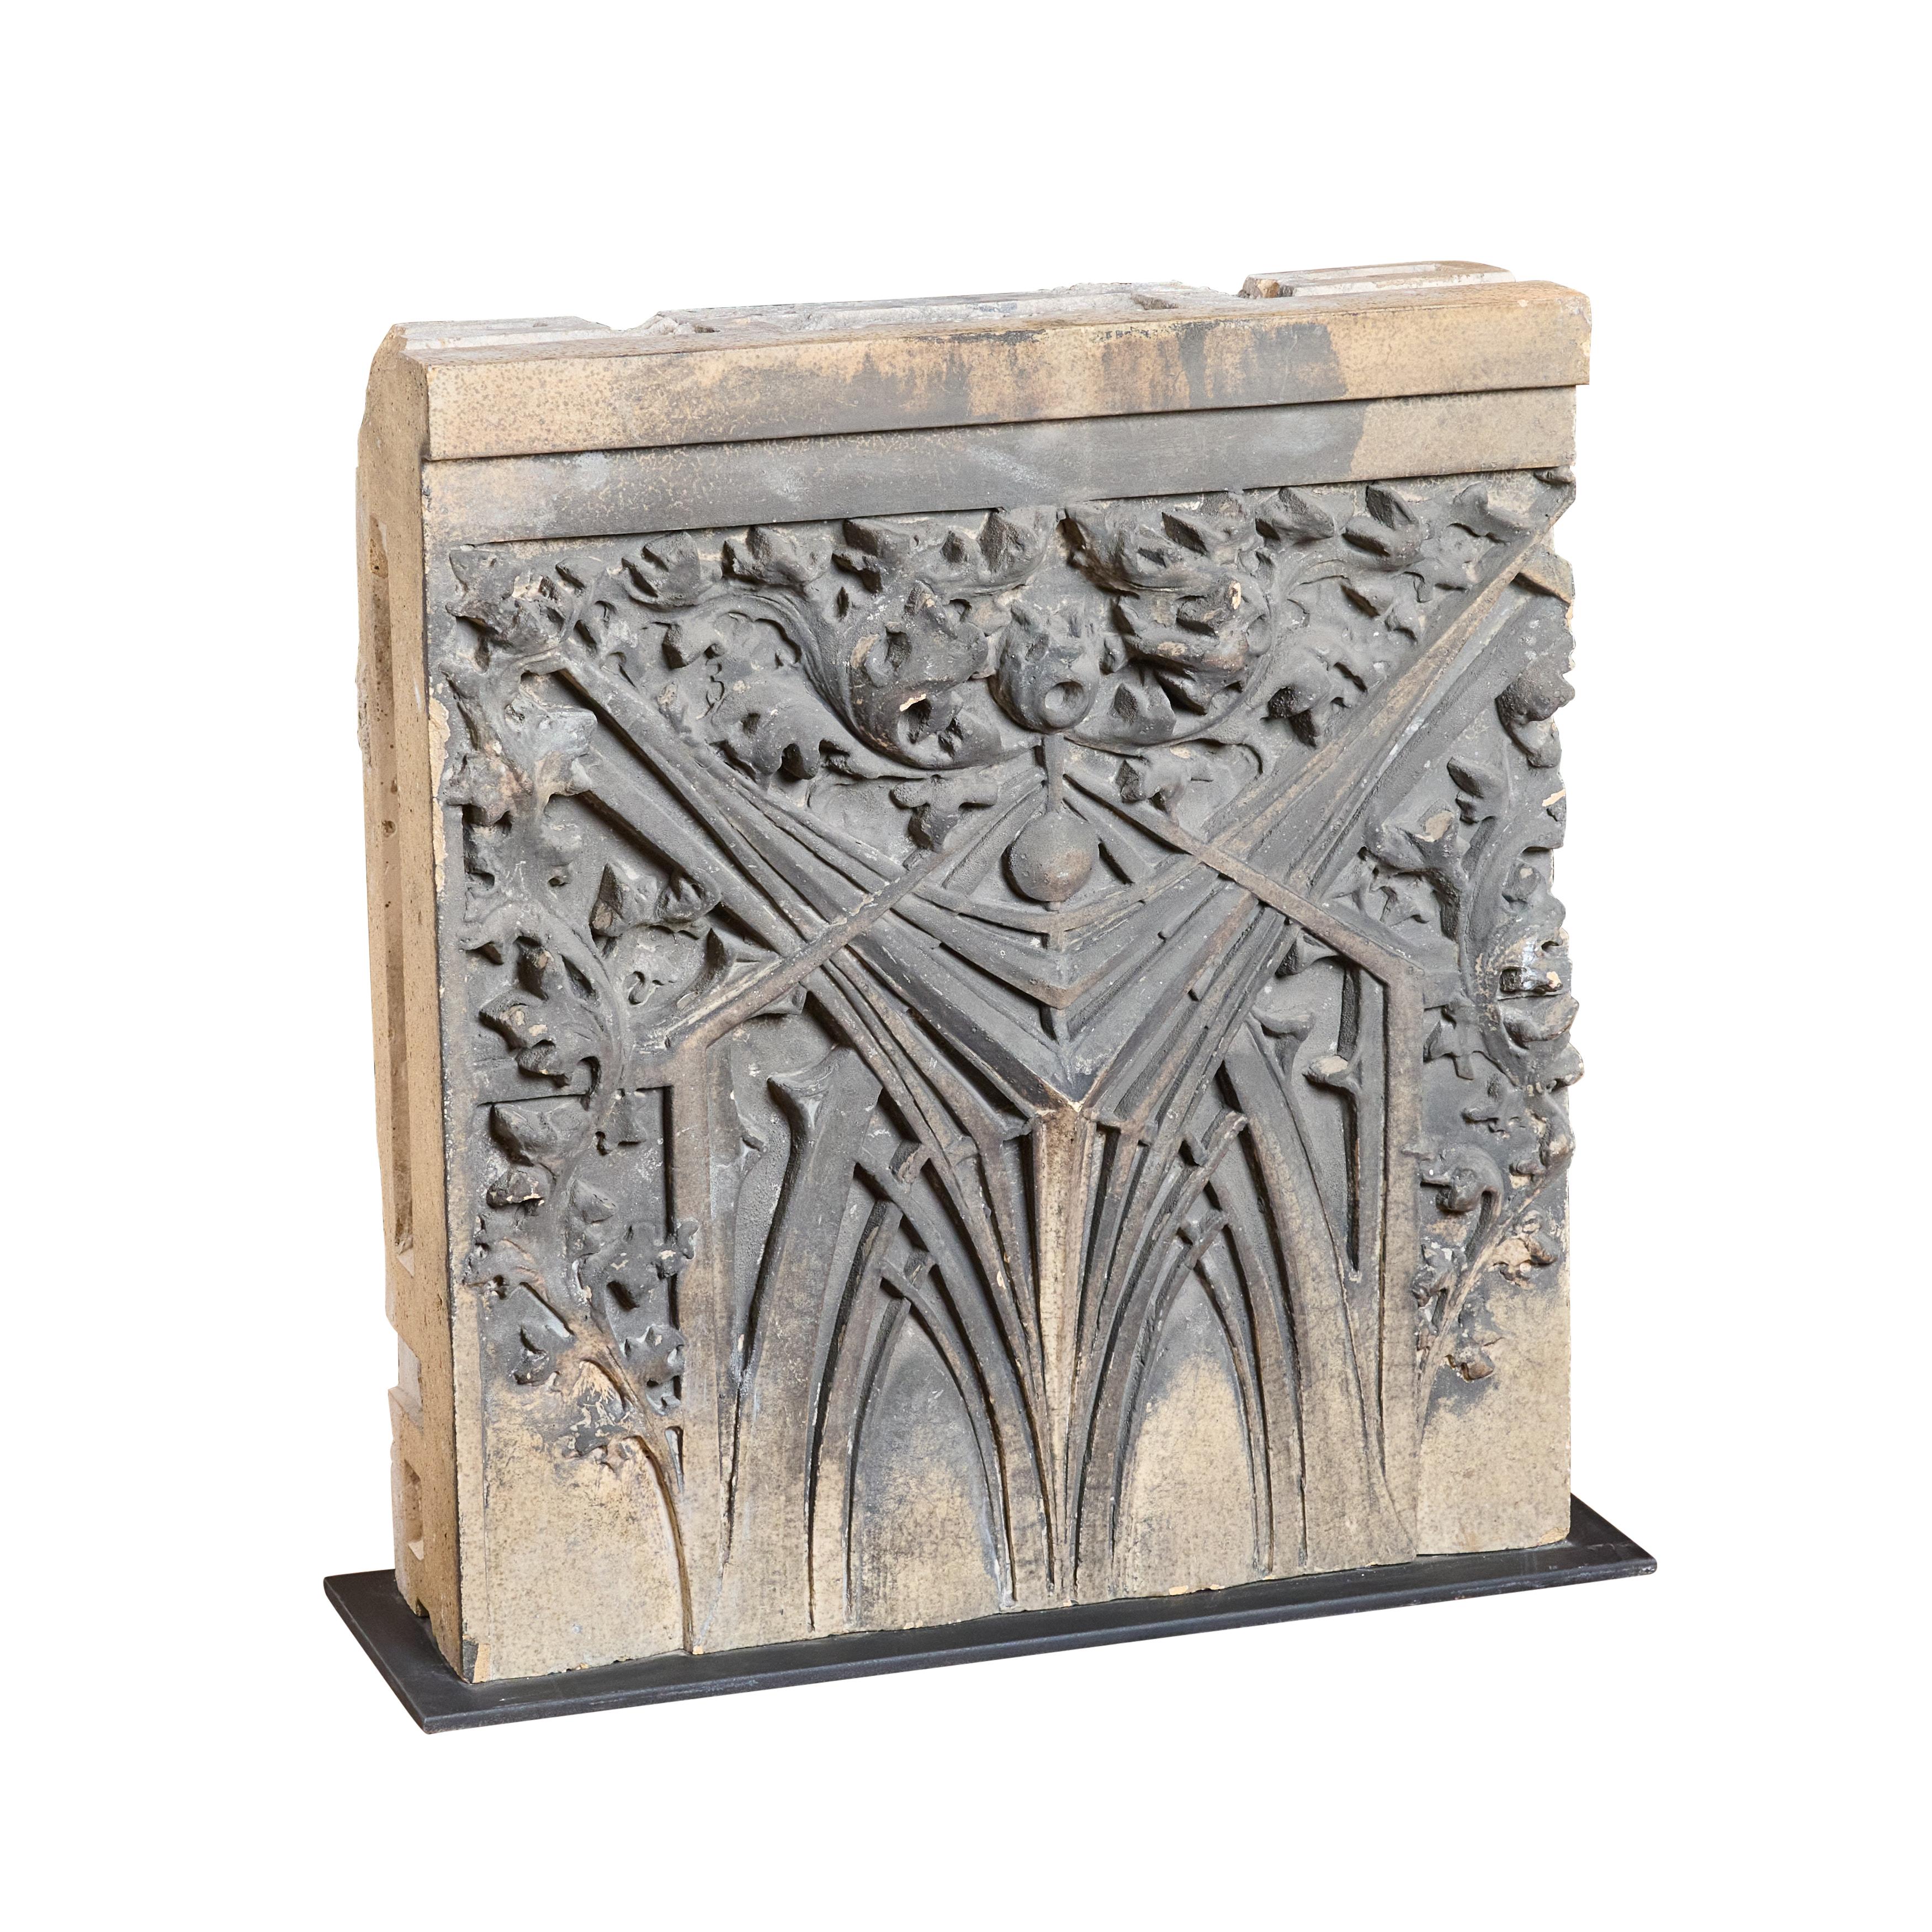 Late 19th Century Facade Ornament from Western Methodist Book Exchange For Sale